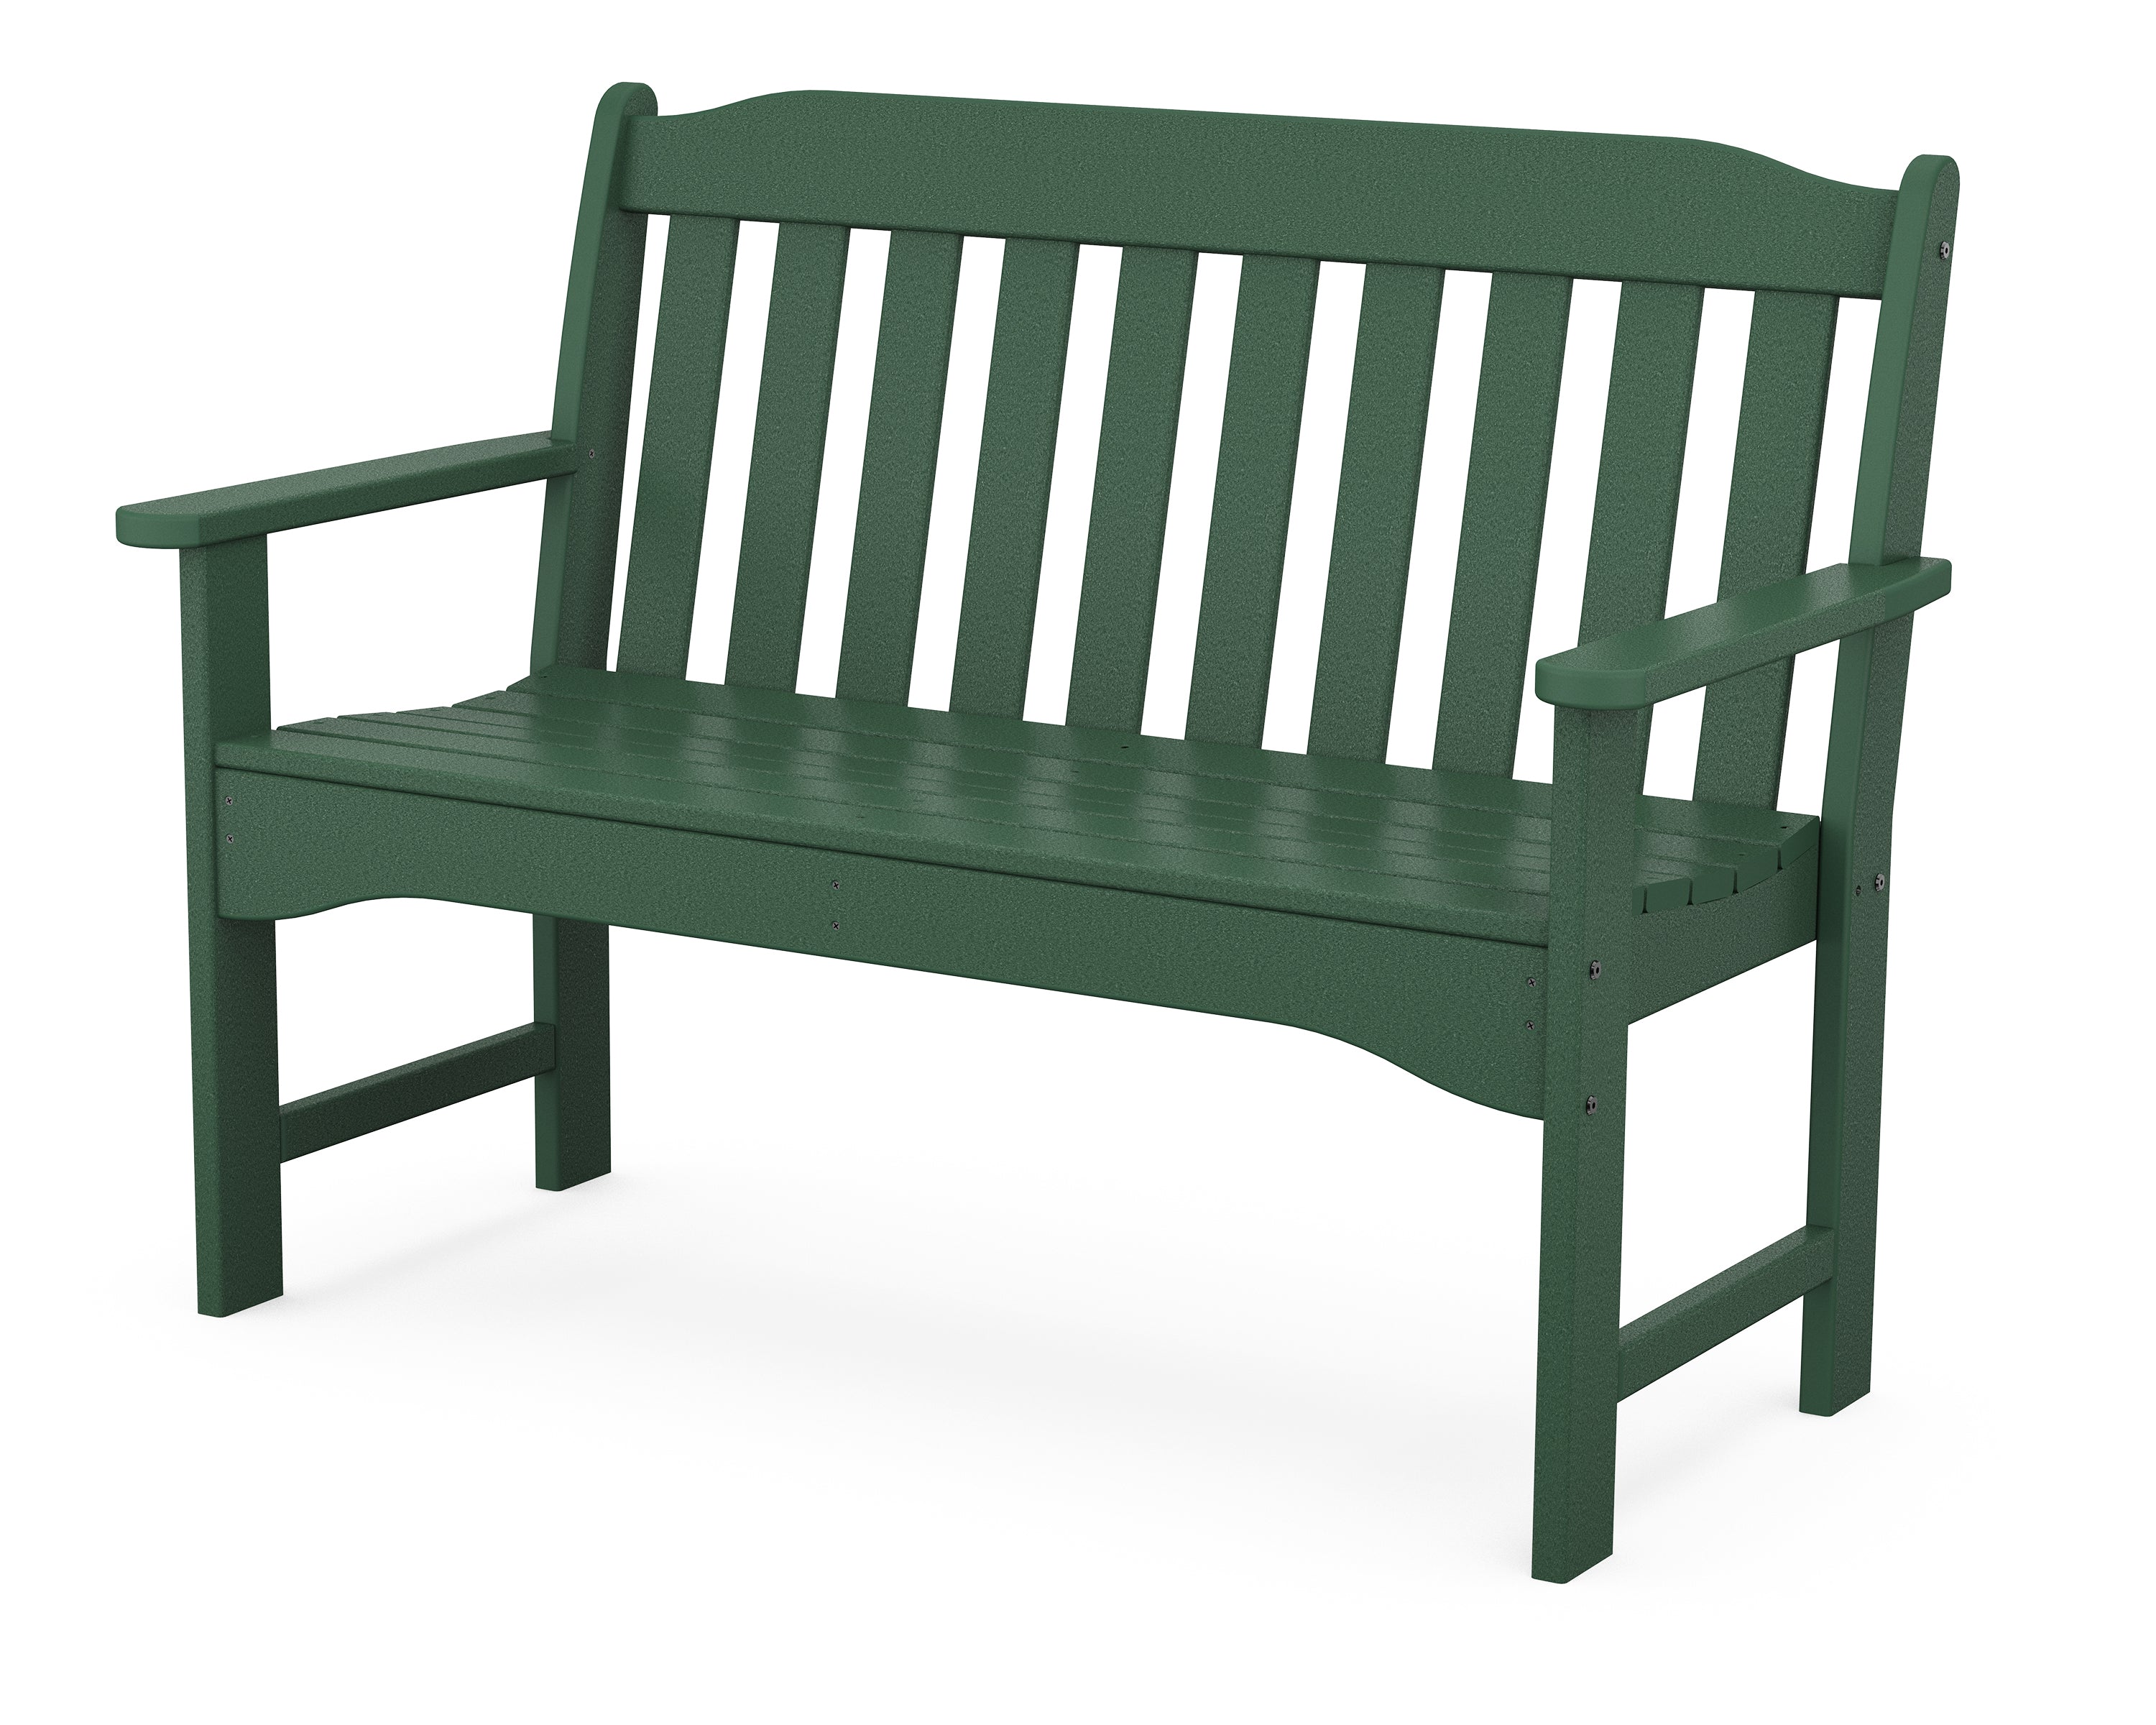 Country Living Country Living 48" Garden Bench in Green